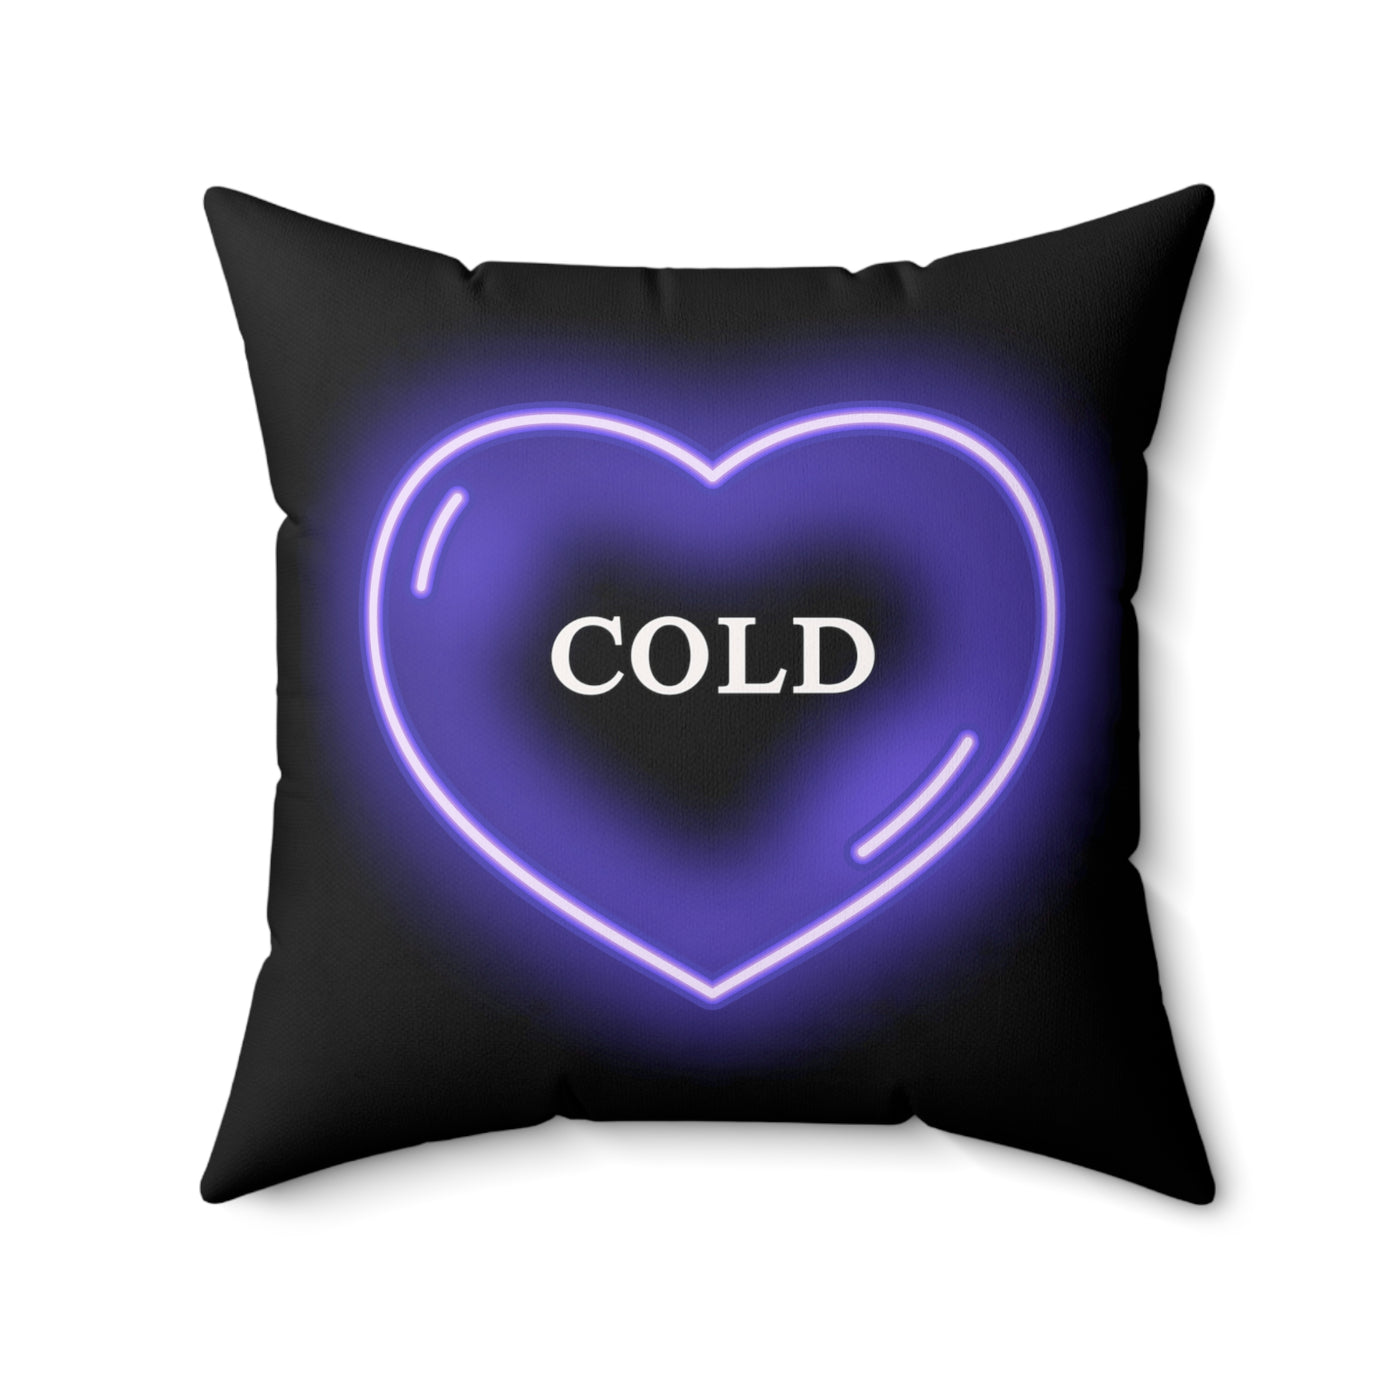 Love Mood Fantasy HOT or COLD Spun Polyester Square Pillow